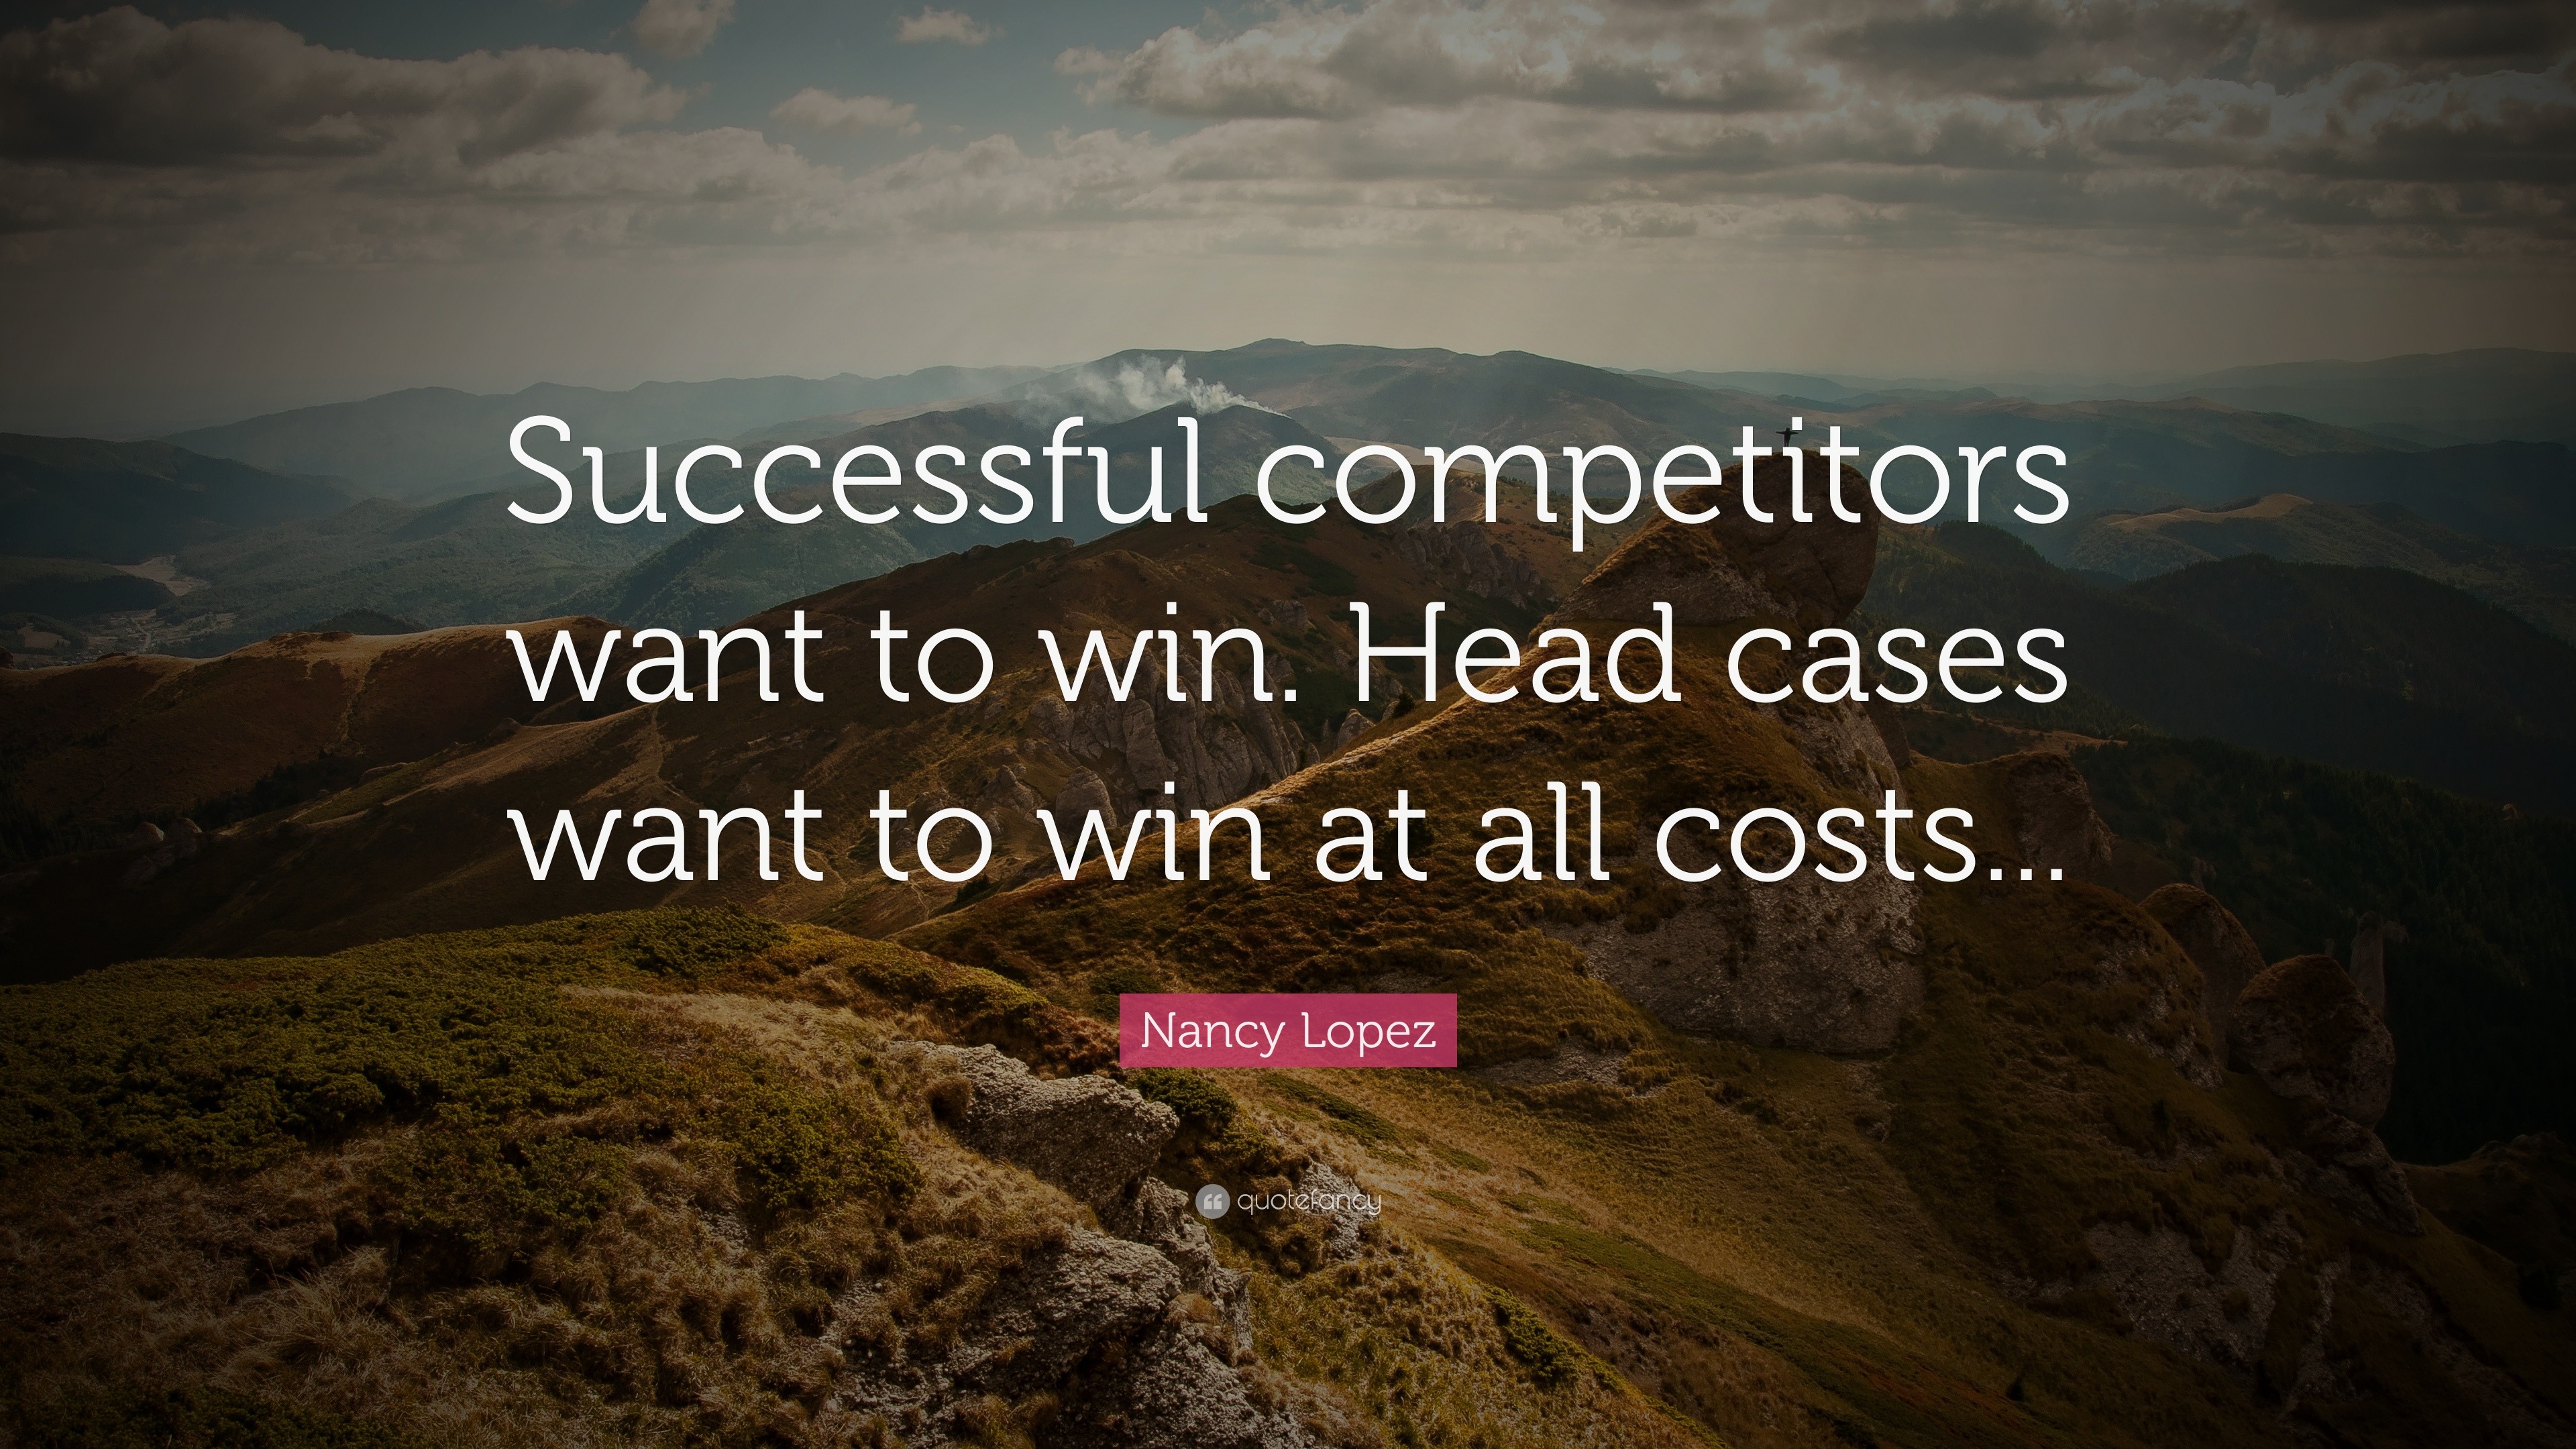 Nancy Lopez Quote: “Successful Competitors Want To Win. Head Cases Want To Win At All Costs...”